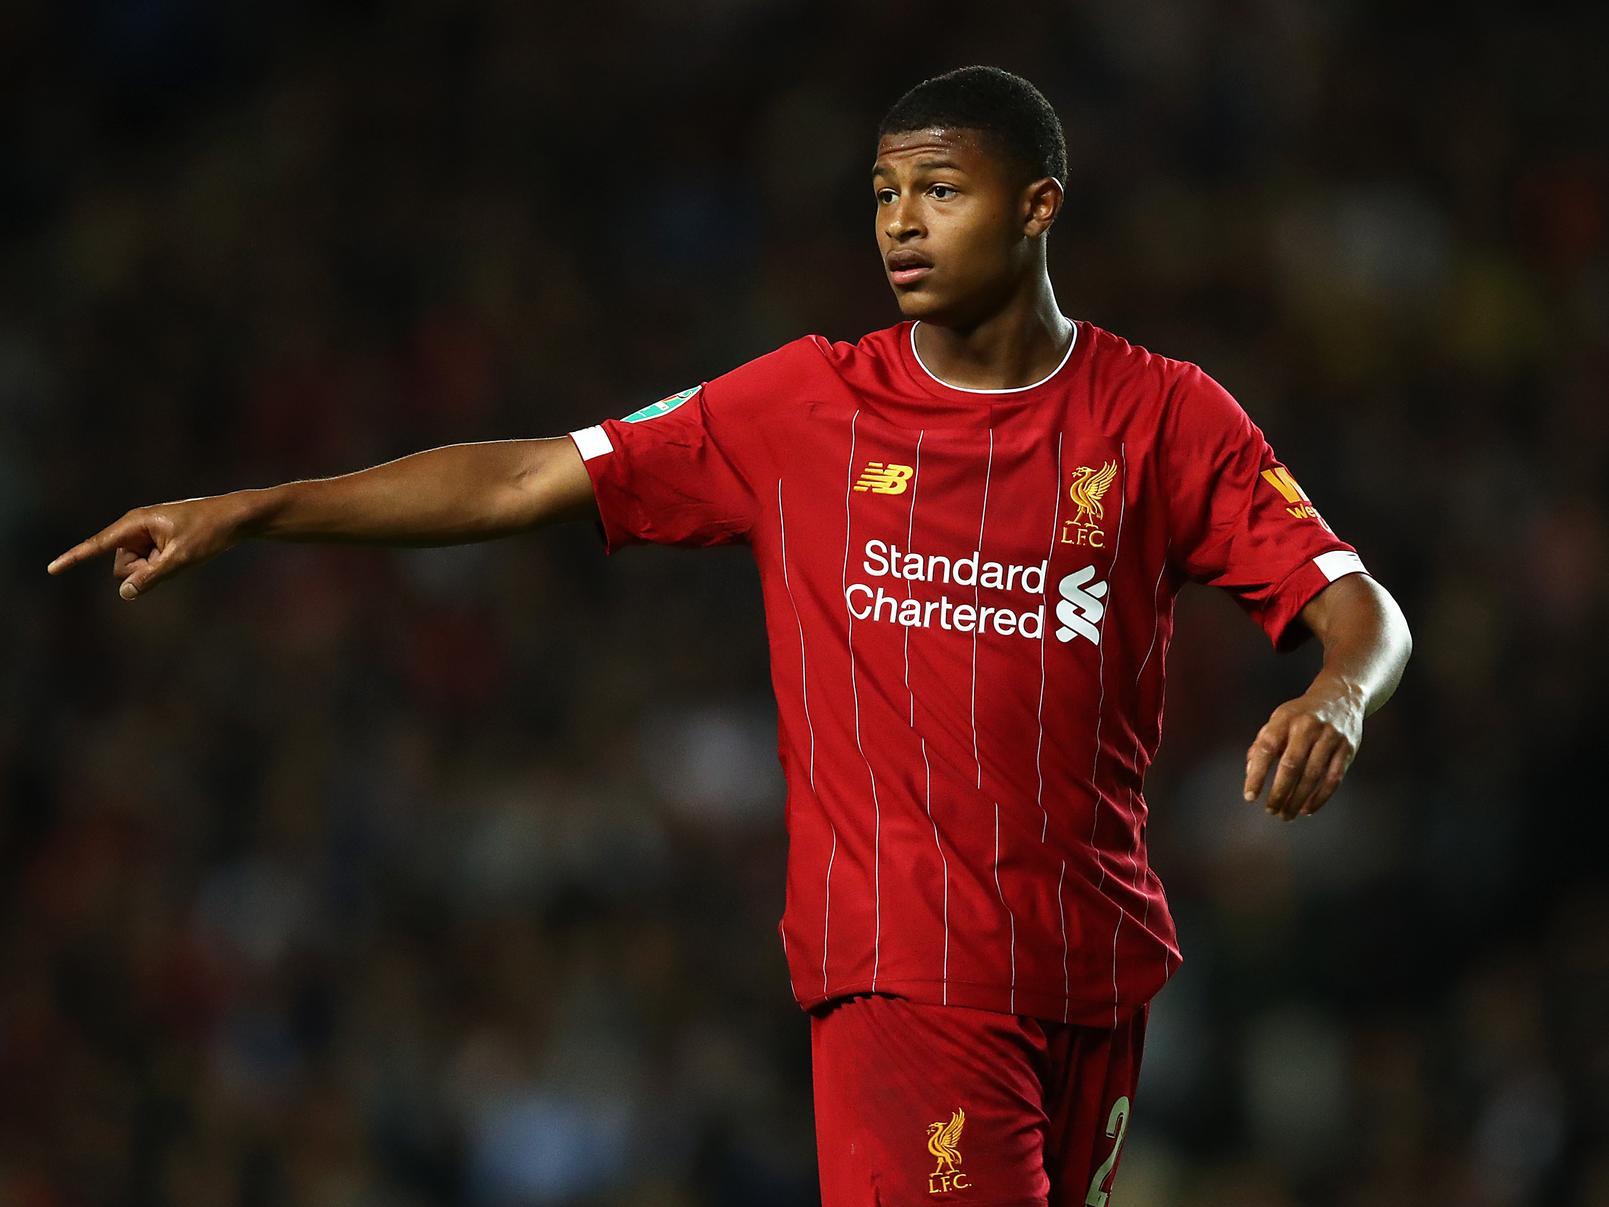 Jurgen Klopp is said to favour his young striker Rhian Brewster joining Leeds United over Swansea City, as he looks to secure a loan for the highly-ratedstarlet. (Goal)